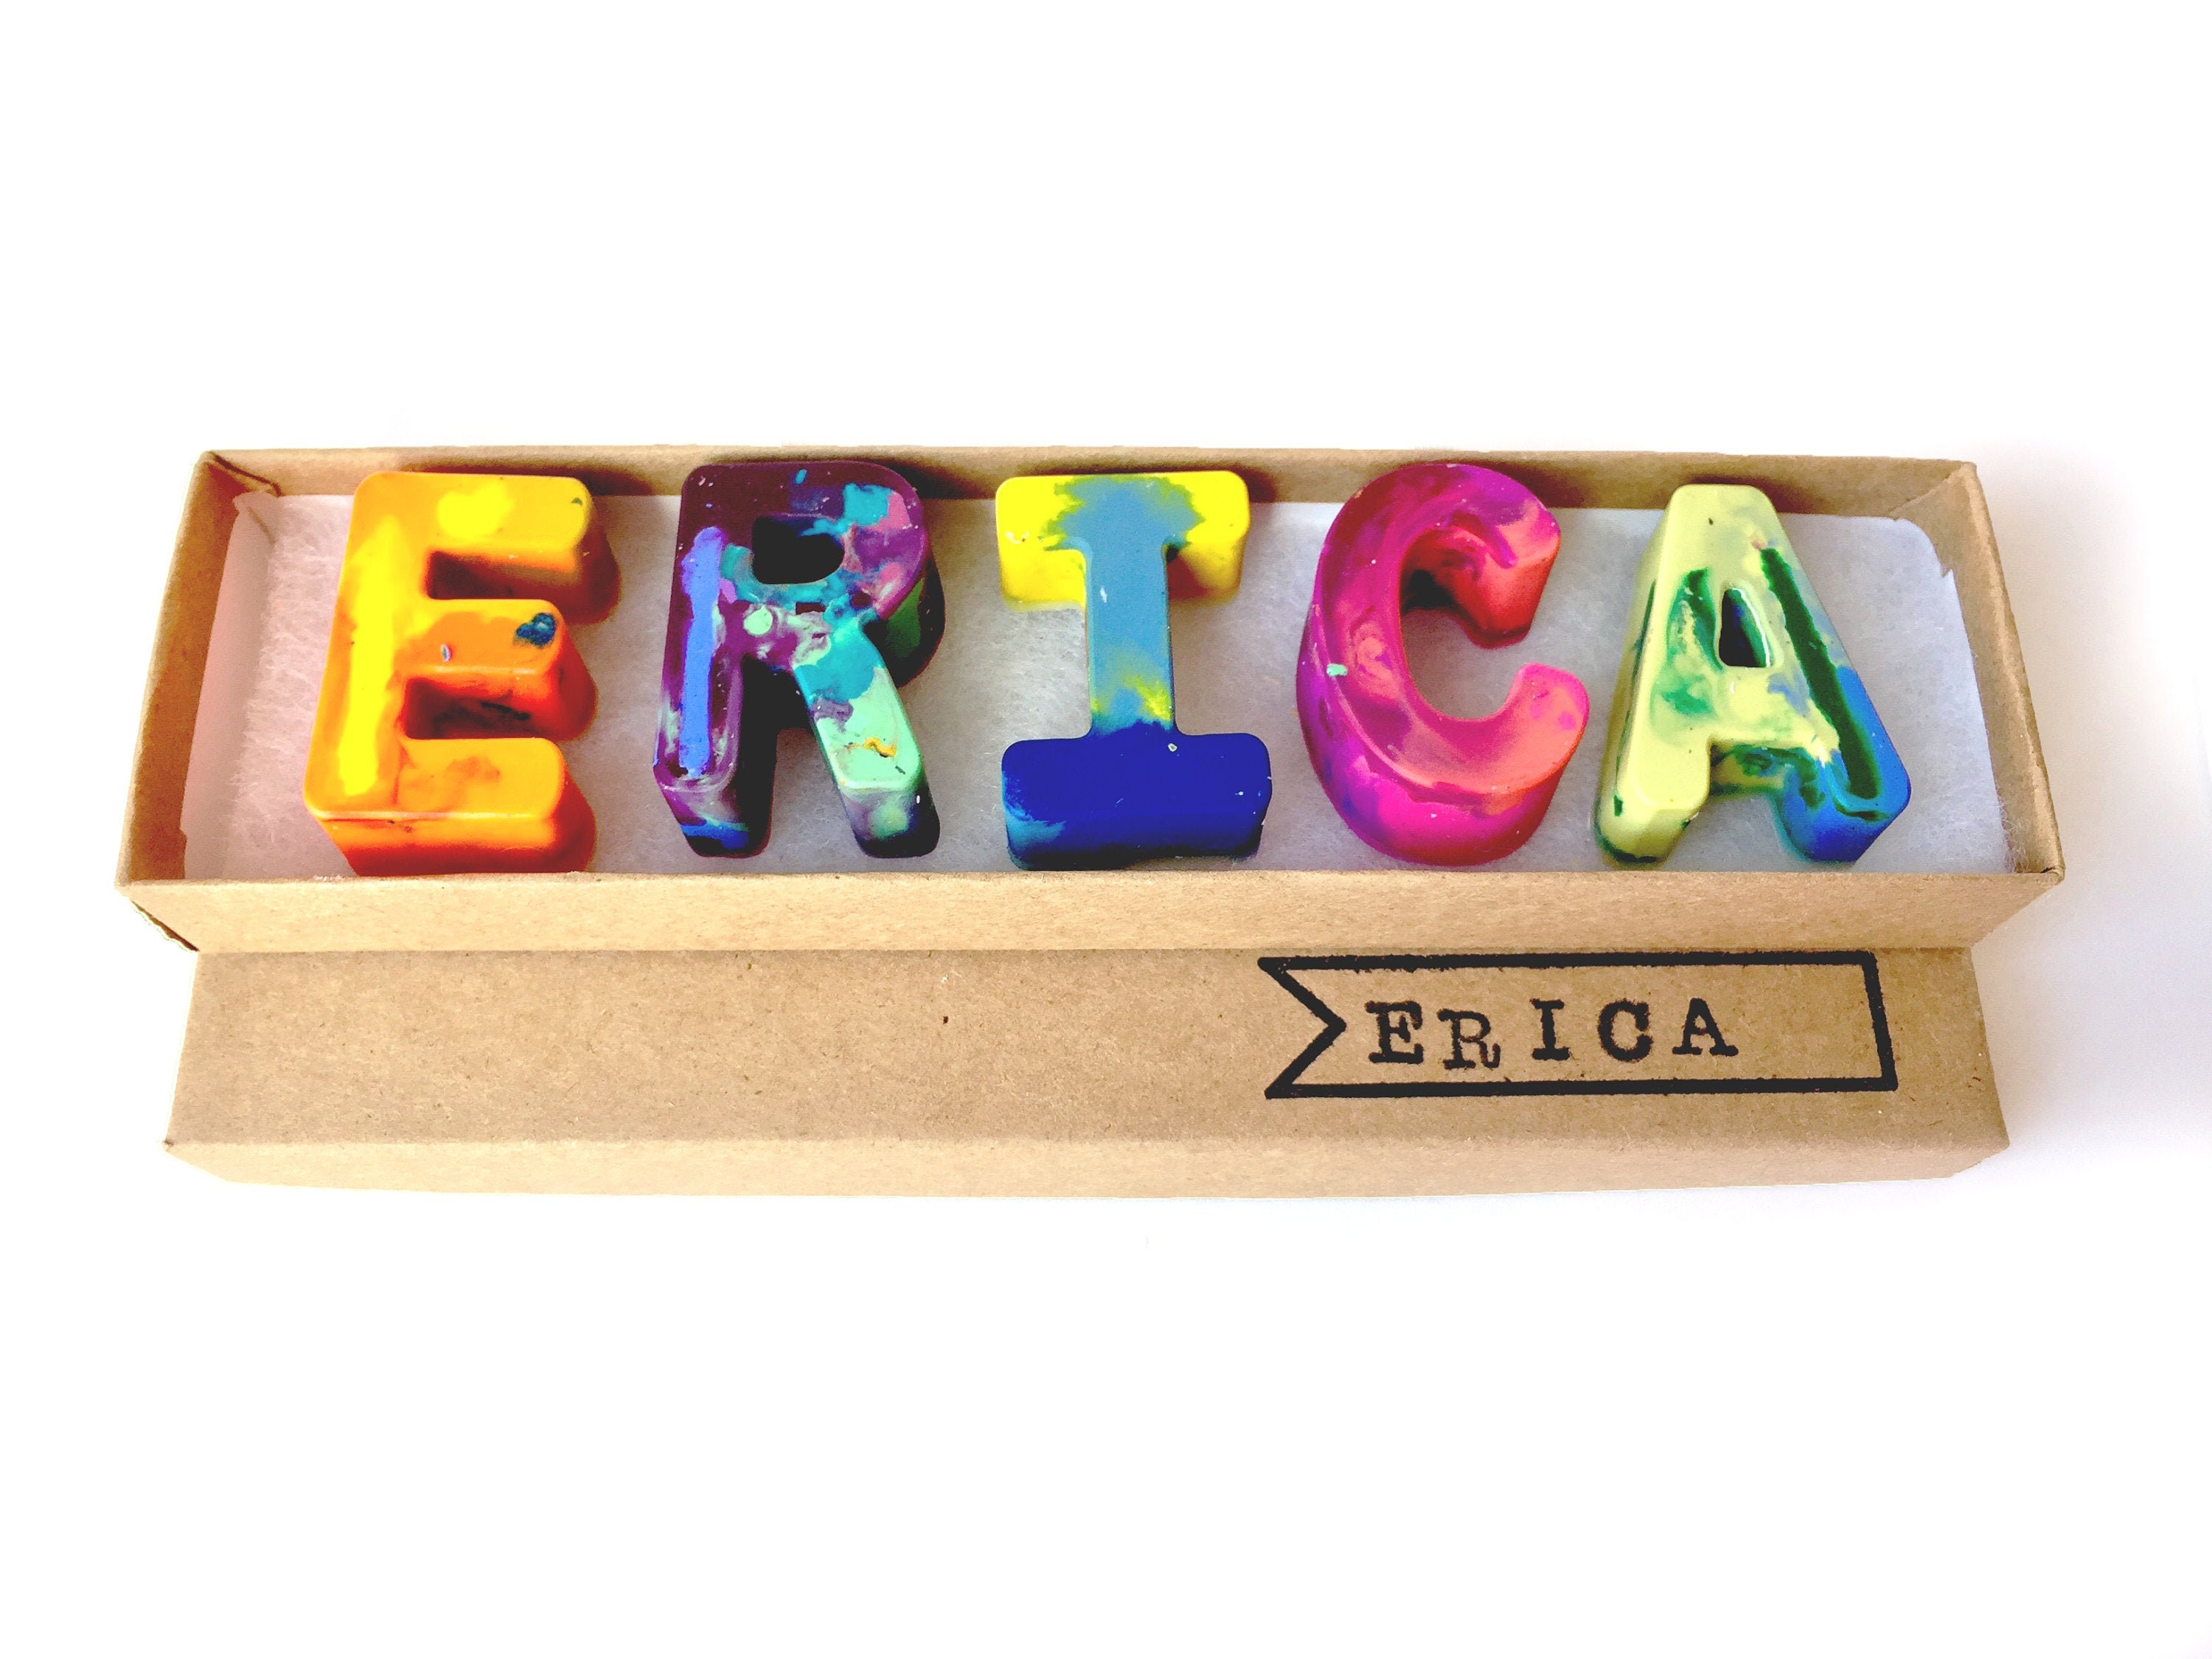 All letters included Personalized crayon names